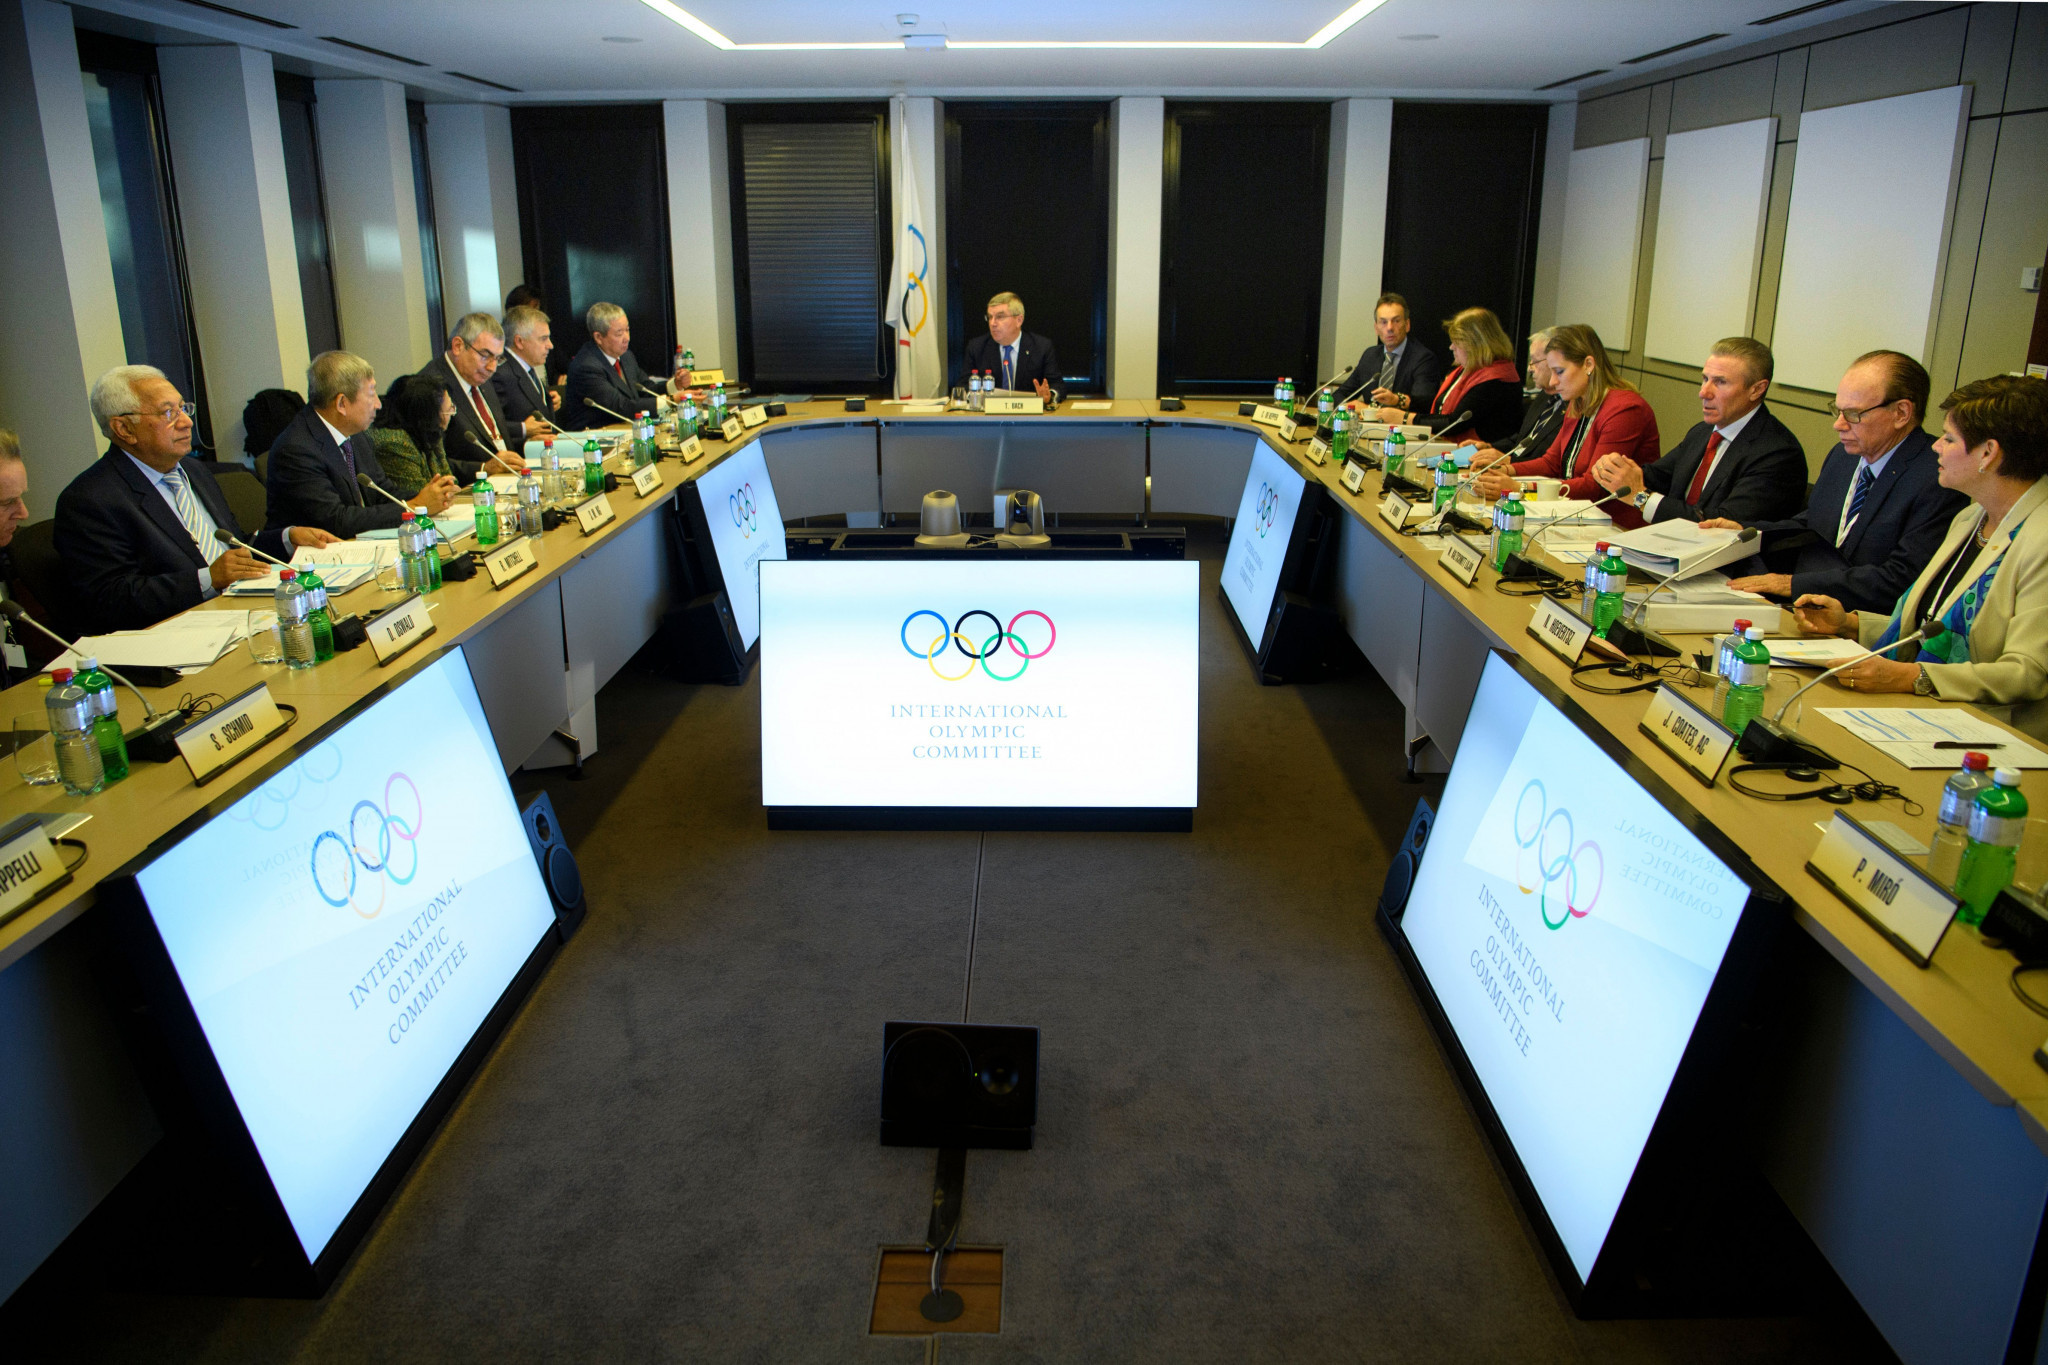 IOC Executive Board approved the proposed date change for Paris 2024 ©Getty Images